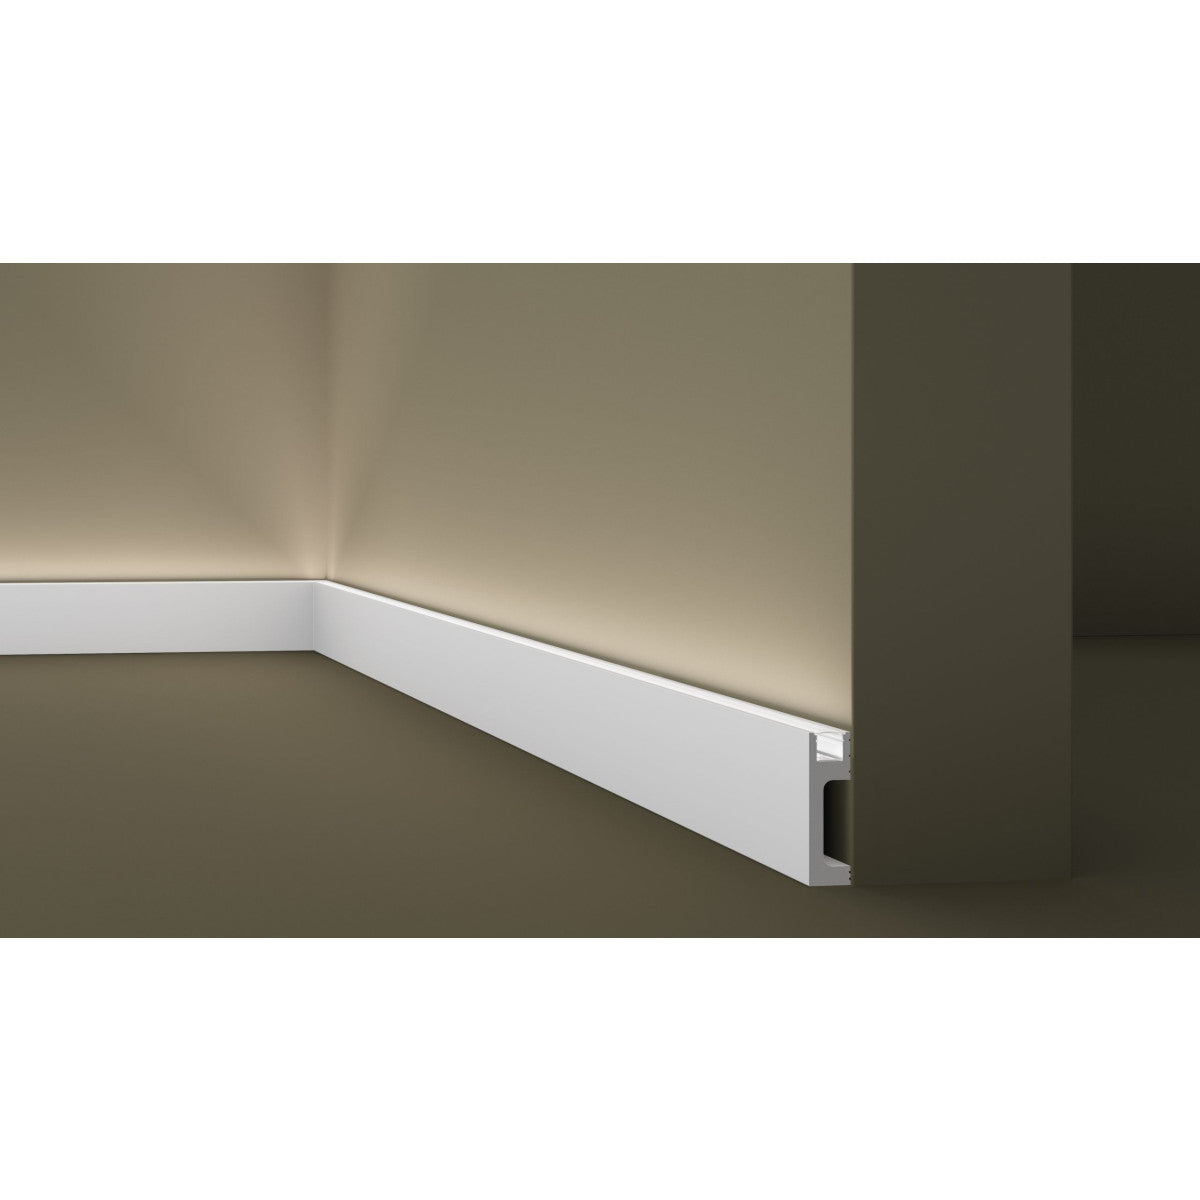 Details more than 71 led skirting board latest